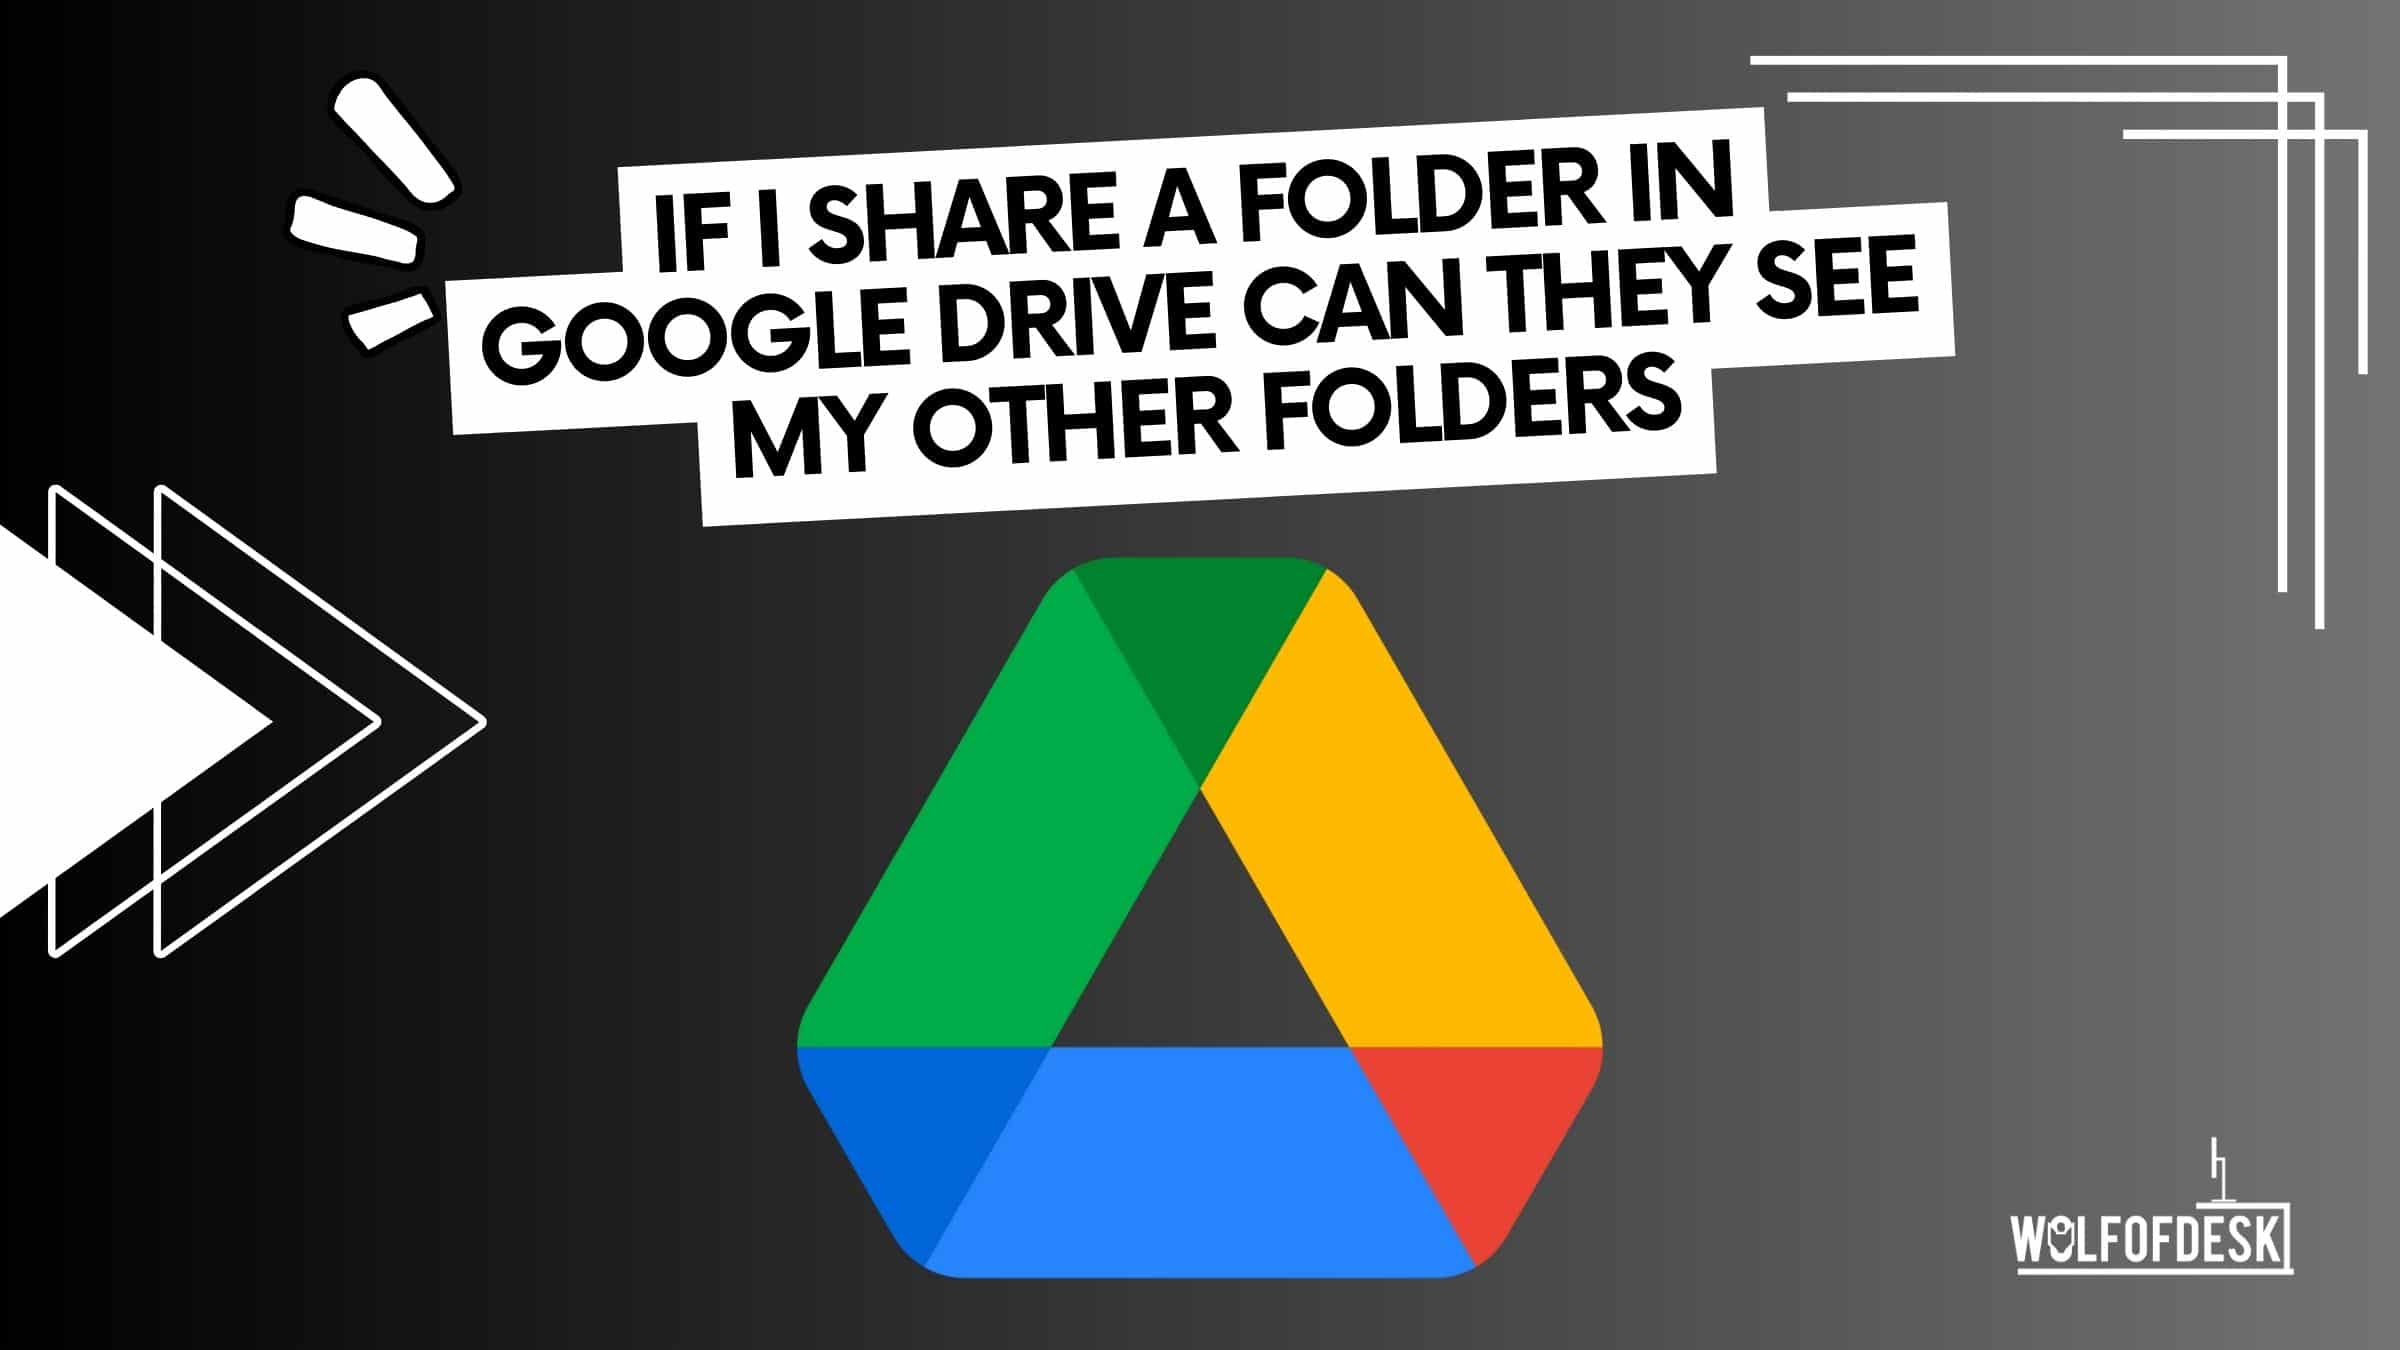 If I Share a Folder in Google Drive Can They See My Other Folders